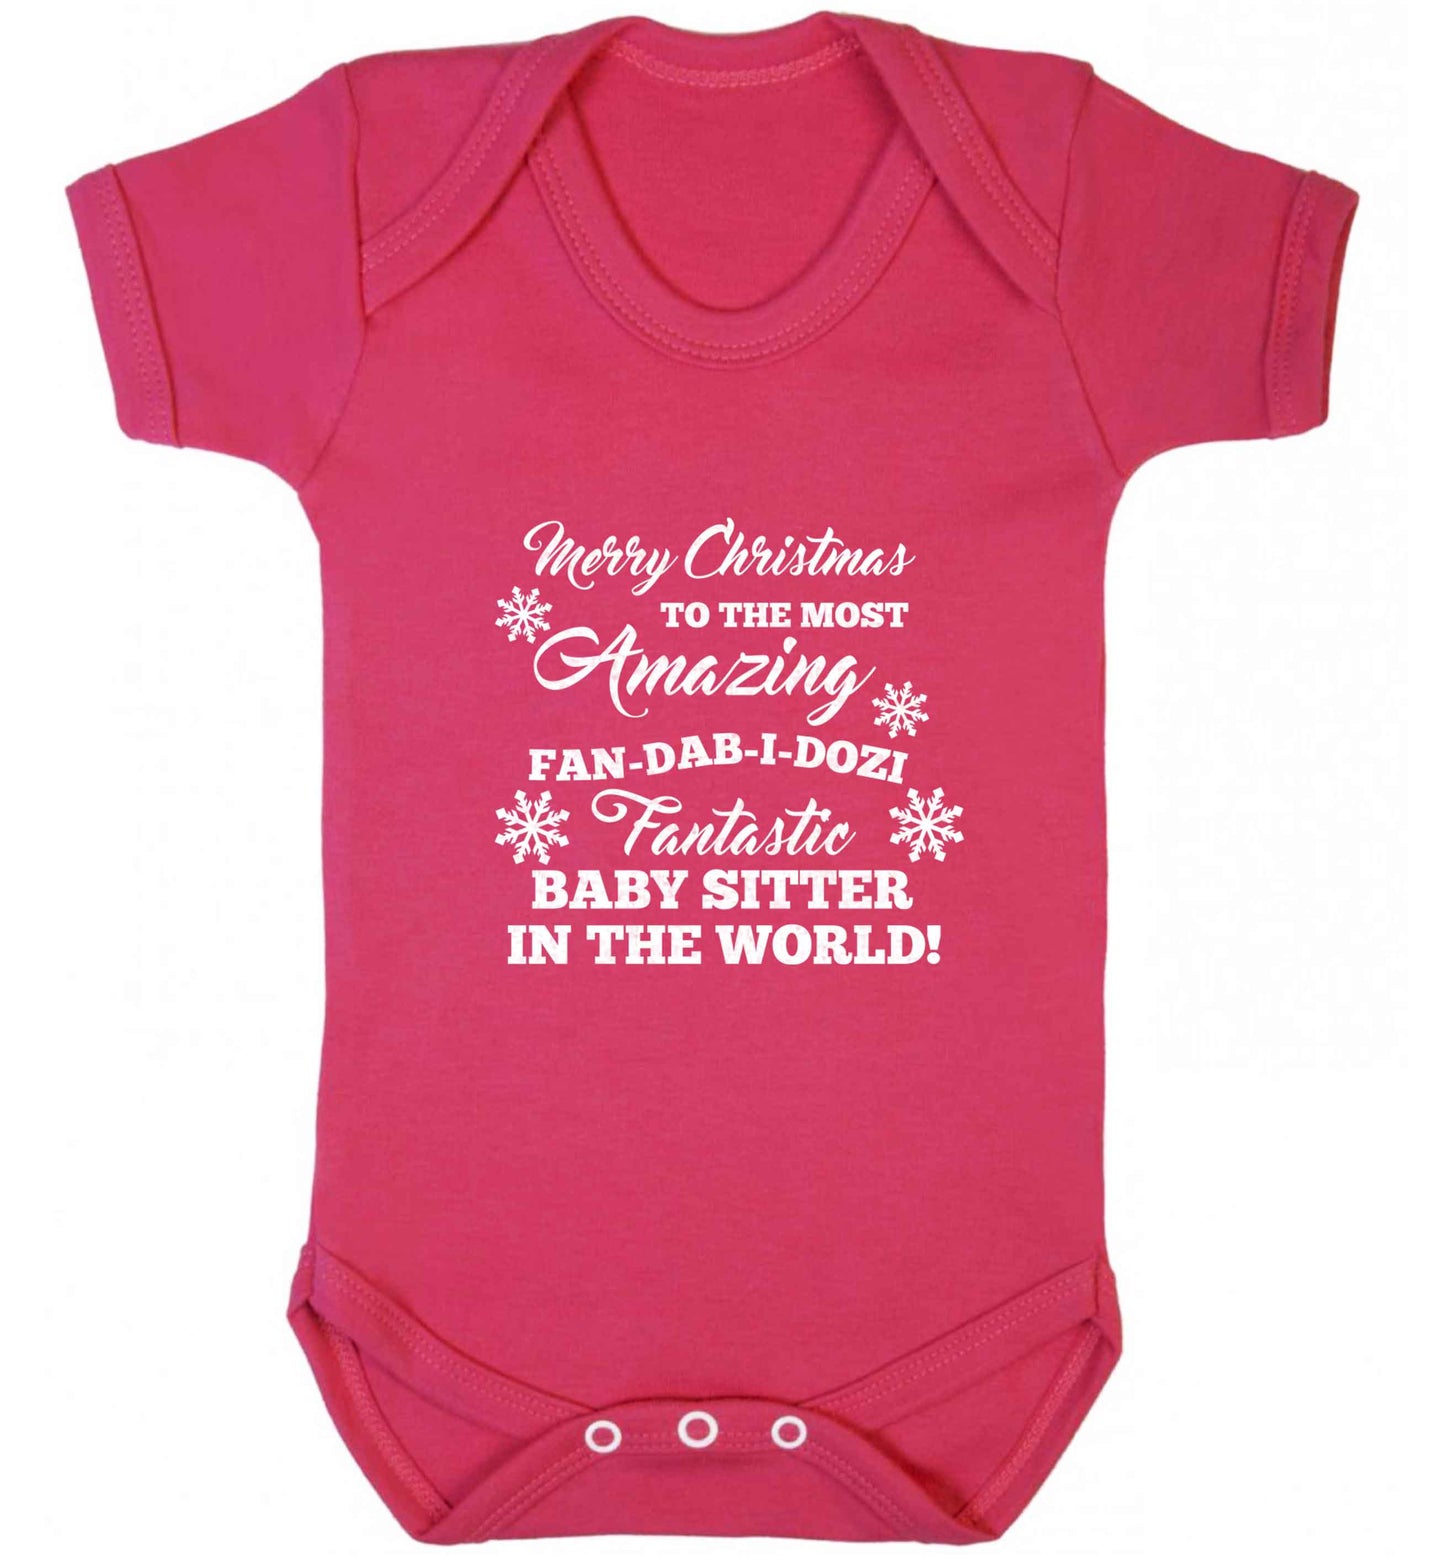 Merry Christmas to the most amazing fan-dab-i-dozi fantasic baby sitter in the world baby vest dark pink 18-24 months